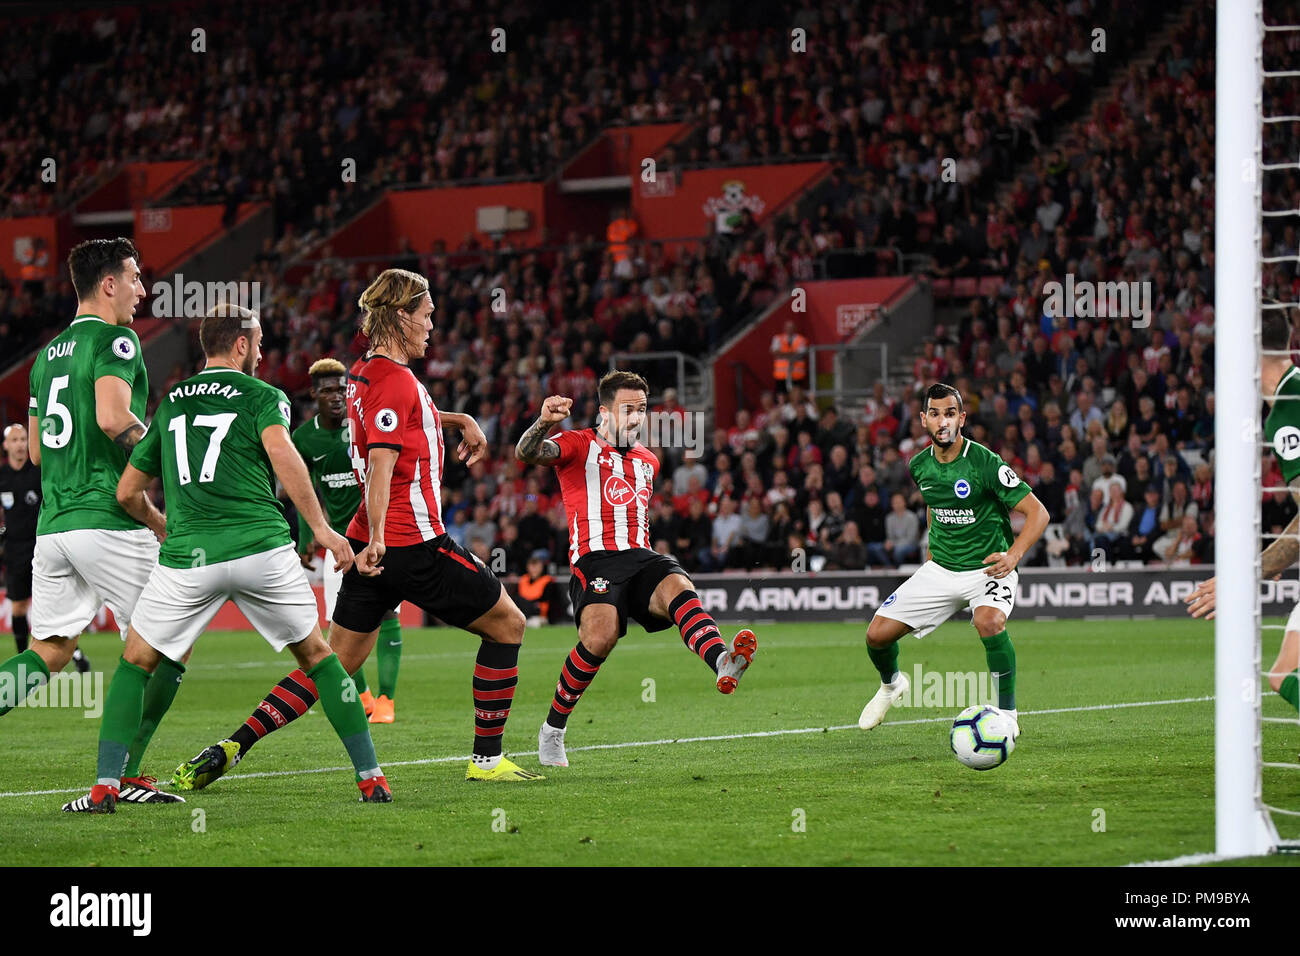 Southampton, UK. 17th September 2018. Danny Ings of Southampton shoots at goal but his shot is blocked on the line - Southampton v Brighton & Hove Albion, Premier League, St Mary's Stadium, Southampton - 17th September 2018   Credit: Richard Calver/Alamy Live News Credit: Richard Calver/Alamy Live News Stock Photo